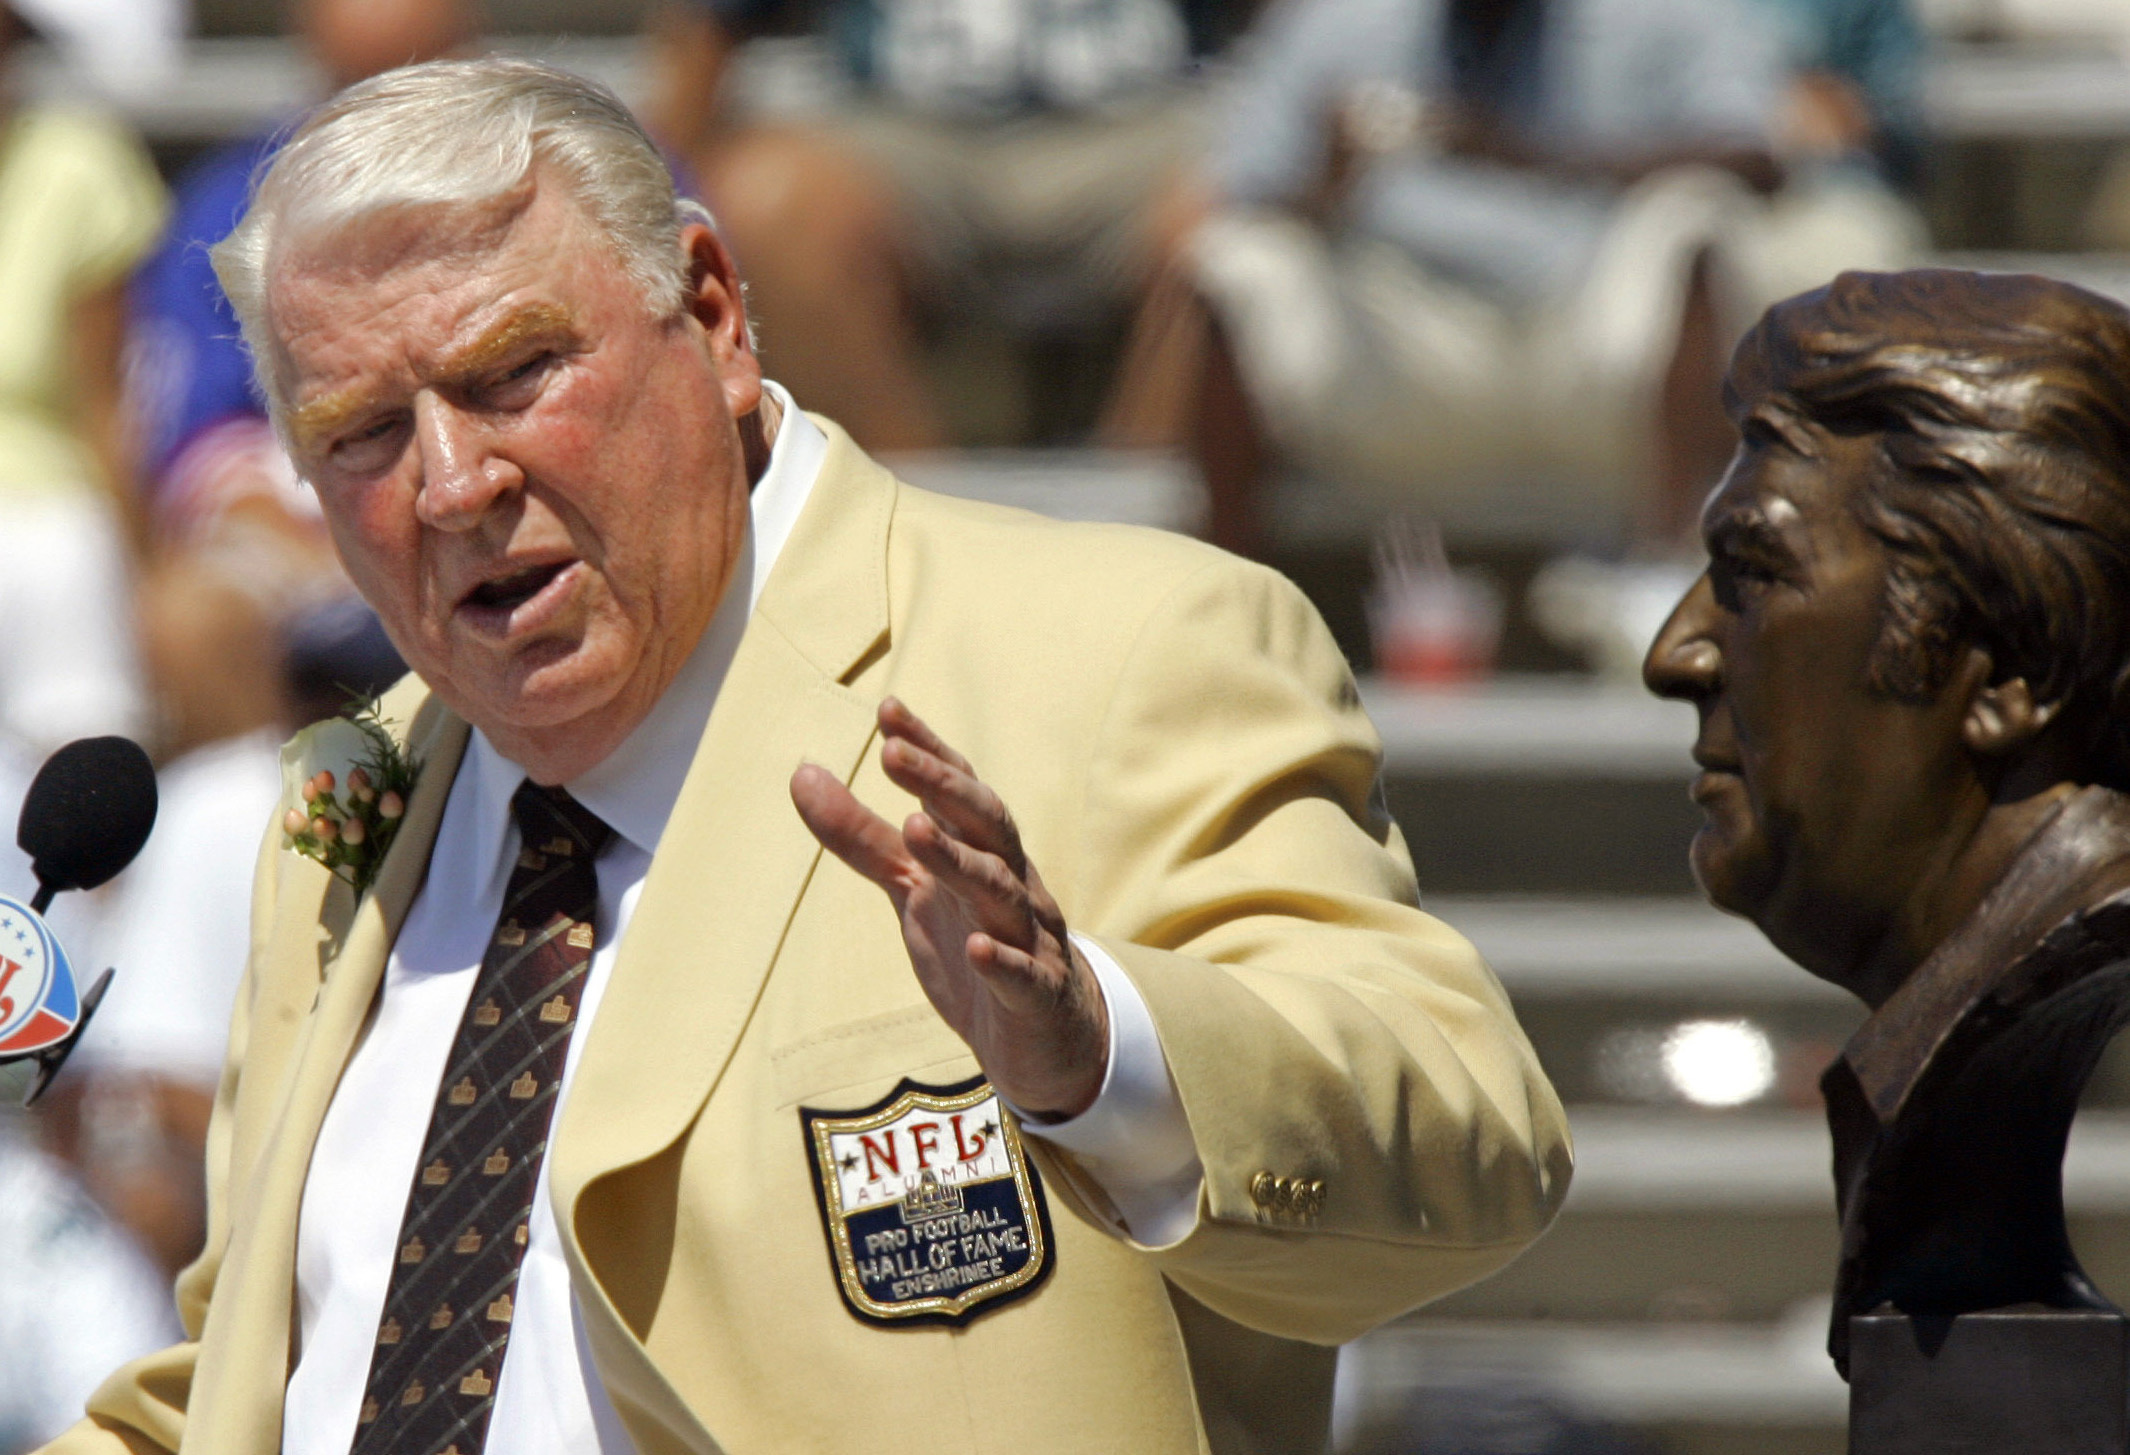 FILE - Former Oakland Raiders coach John Madden gestures toward a bust of himself during his enshrinement into the Pro Football Hall of Fame in Canton, Ohio, Aug. 5, 2006. John Madden, the Hall of Fame coach turned broadcaster whose exuberant calls combined with simple explanations provided a weekly soundtrack to NFL games for three decades, died Tuesday, Dec. 28, 2021, the NFL said. He was 85.